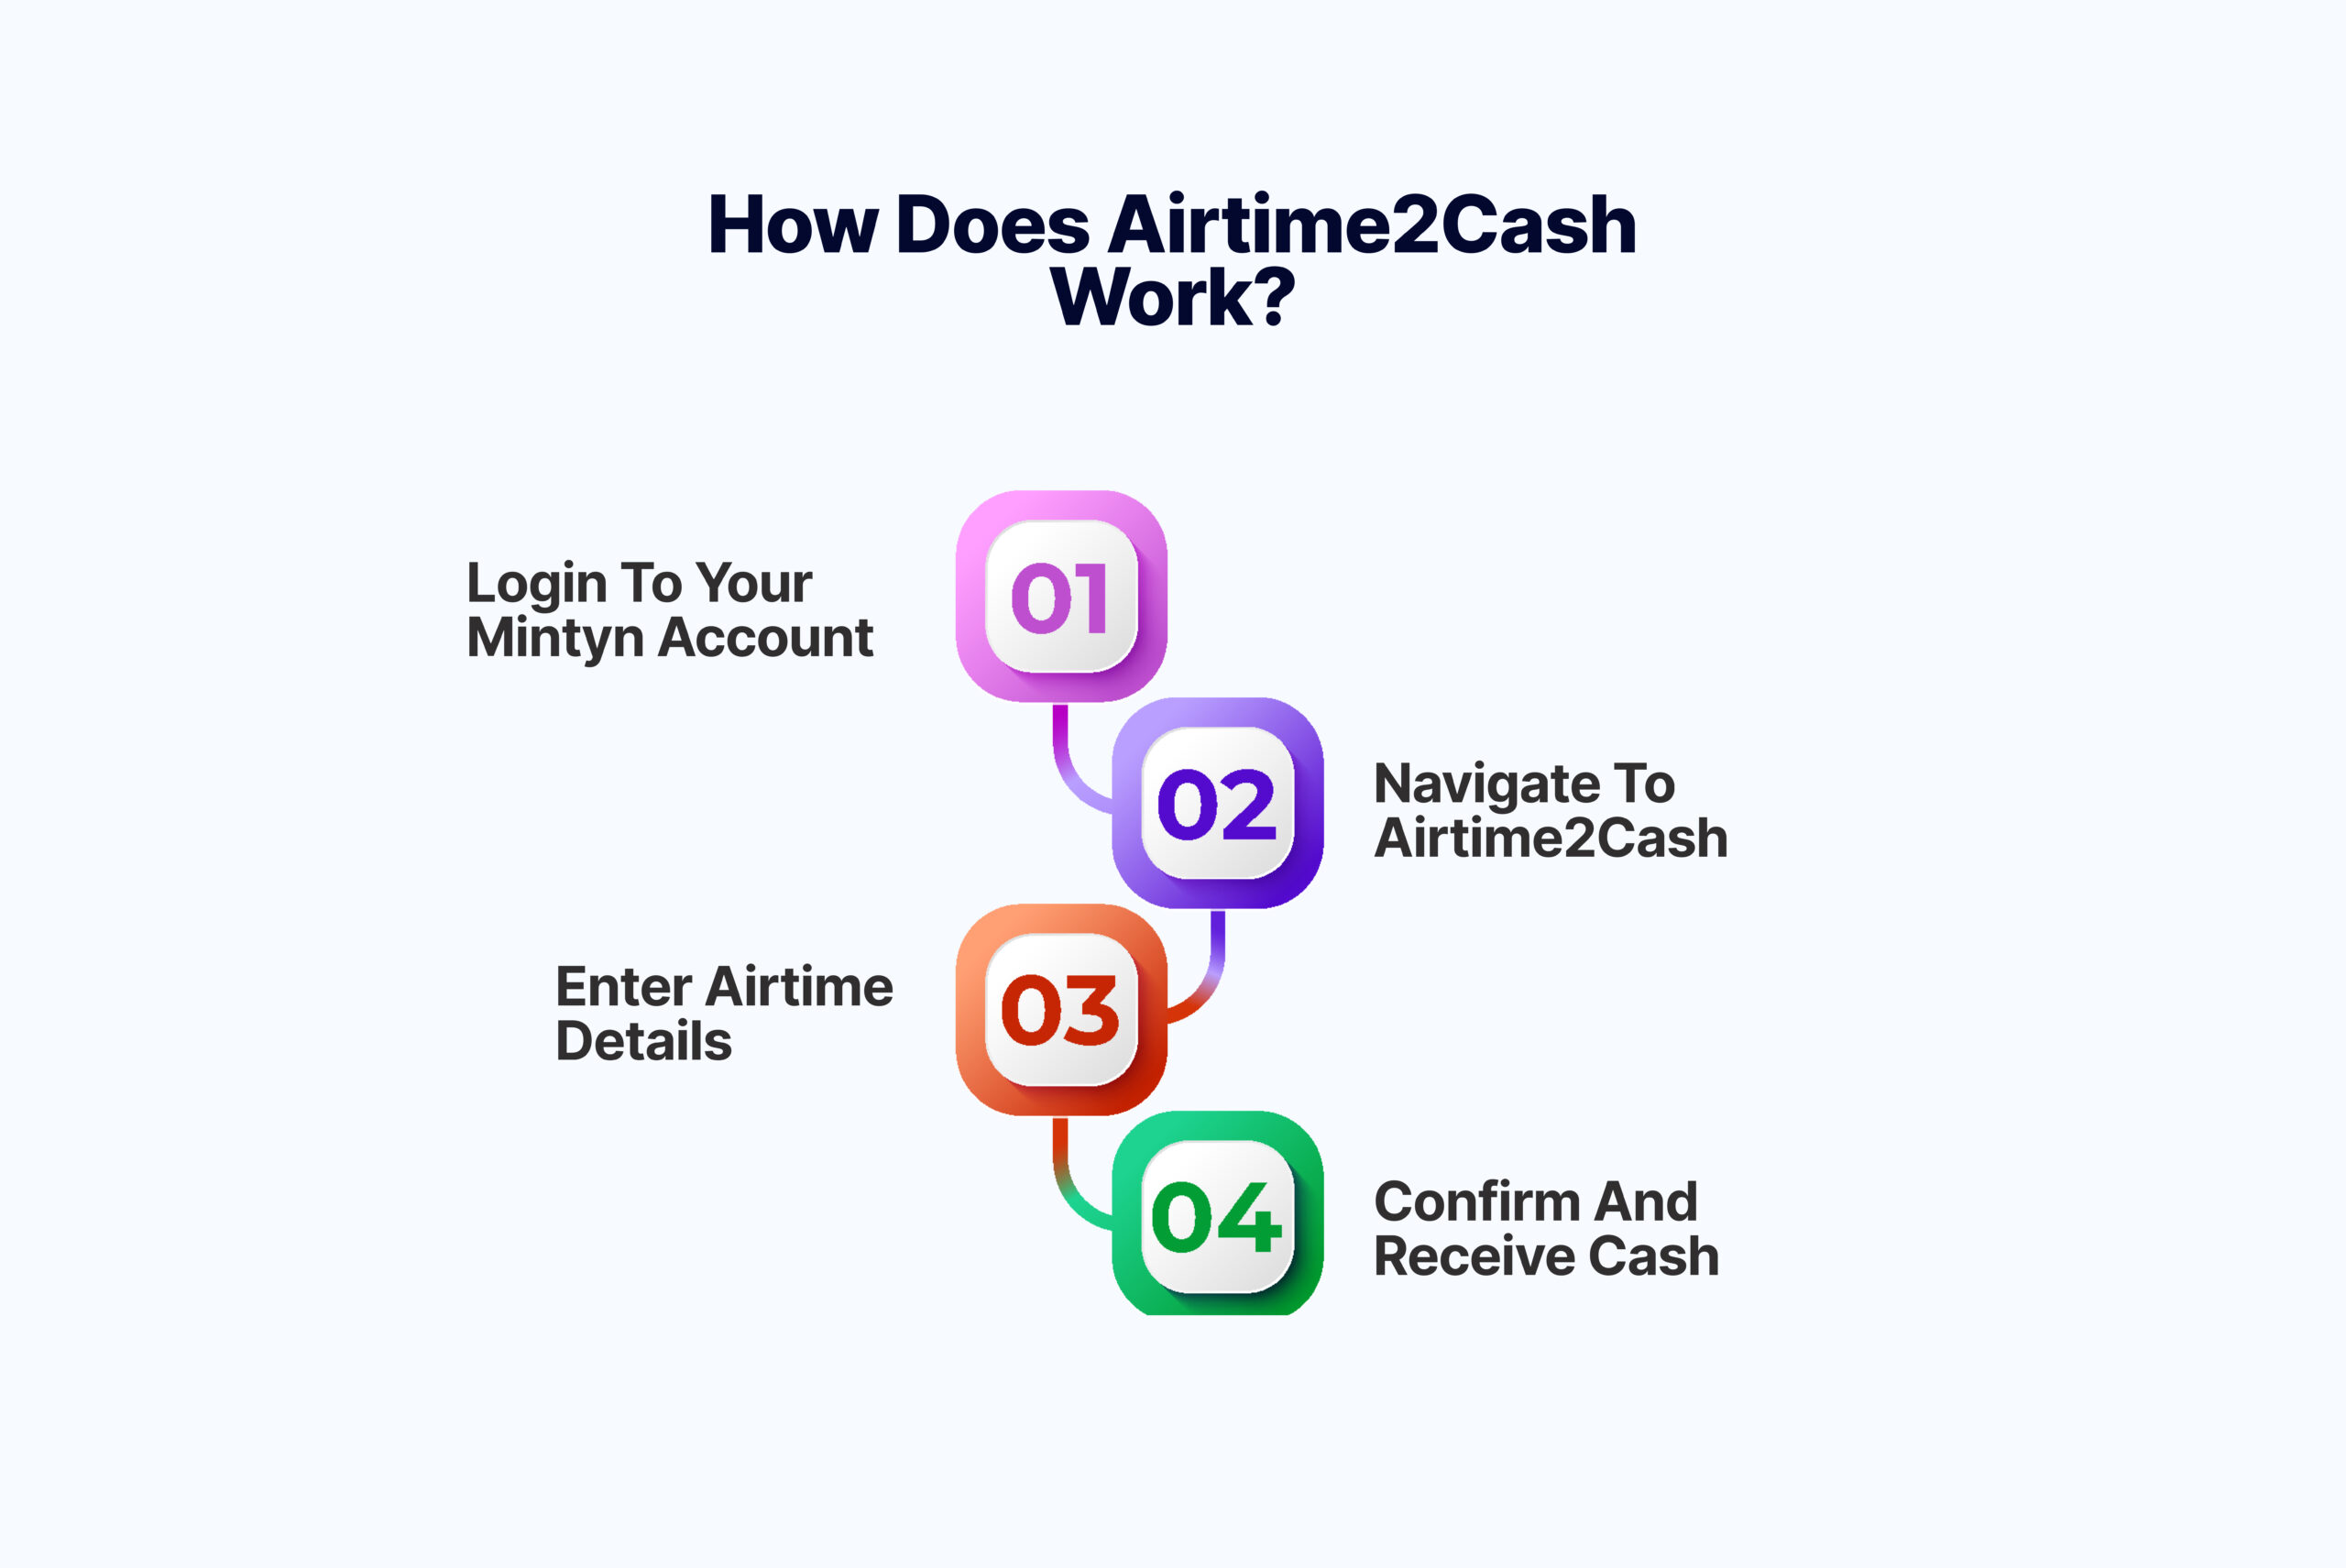 How do you sell airtime with Mintyn's Airtime to cash feature?